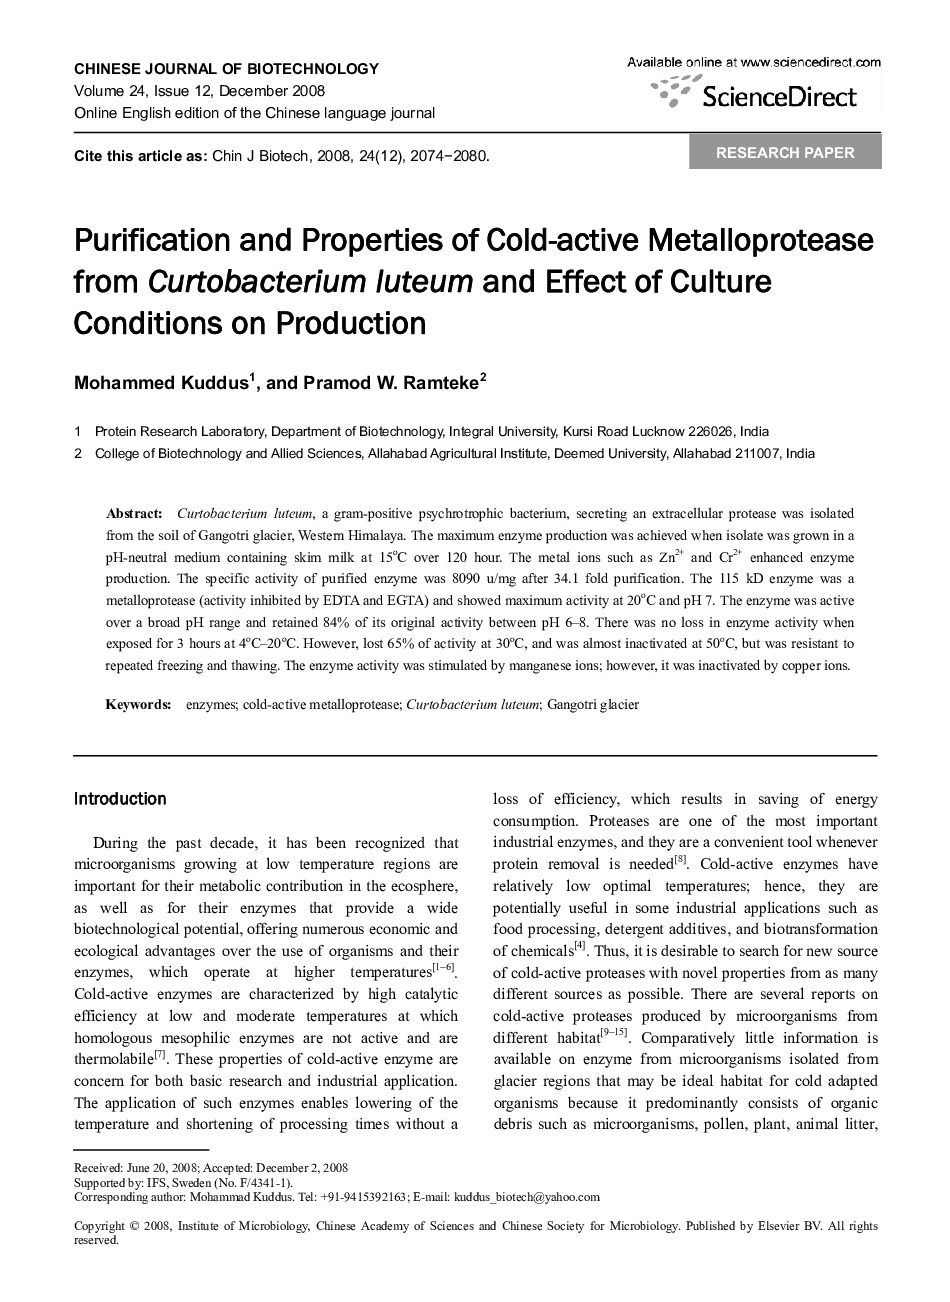 Purification and Properties of Cold-active Metalloprotease from Curtobacterium luteum and Effect of Culture Conditions on Production